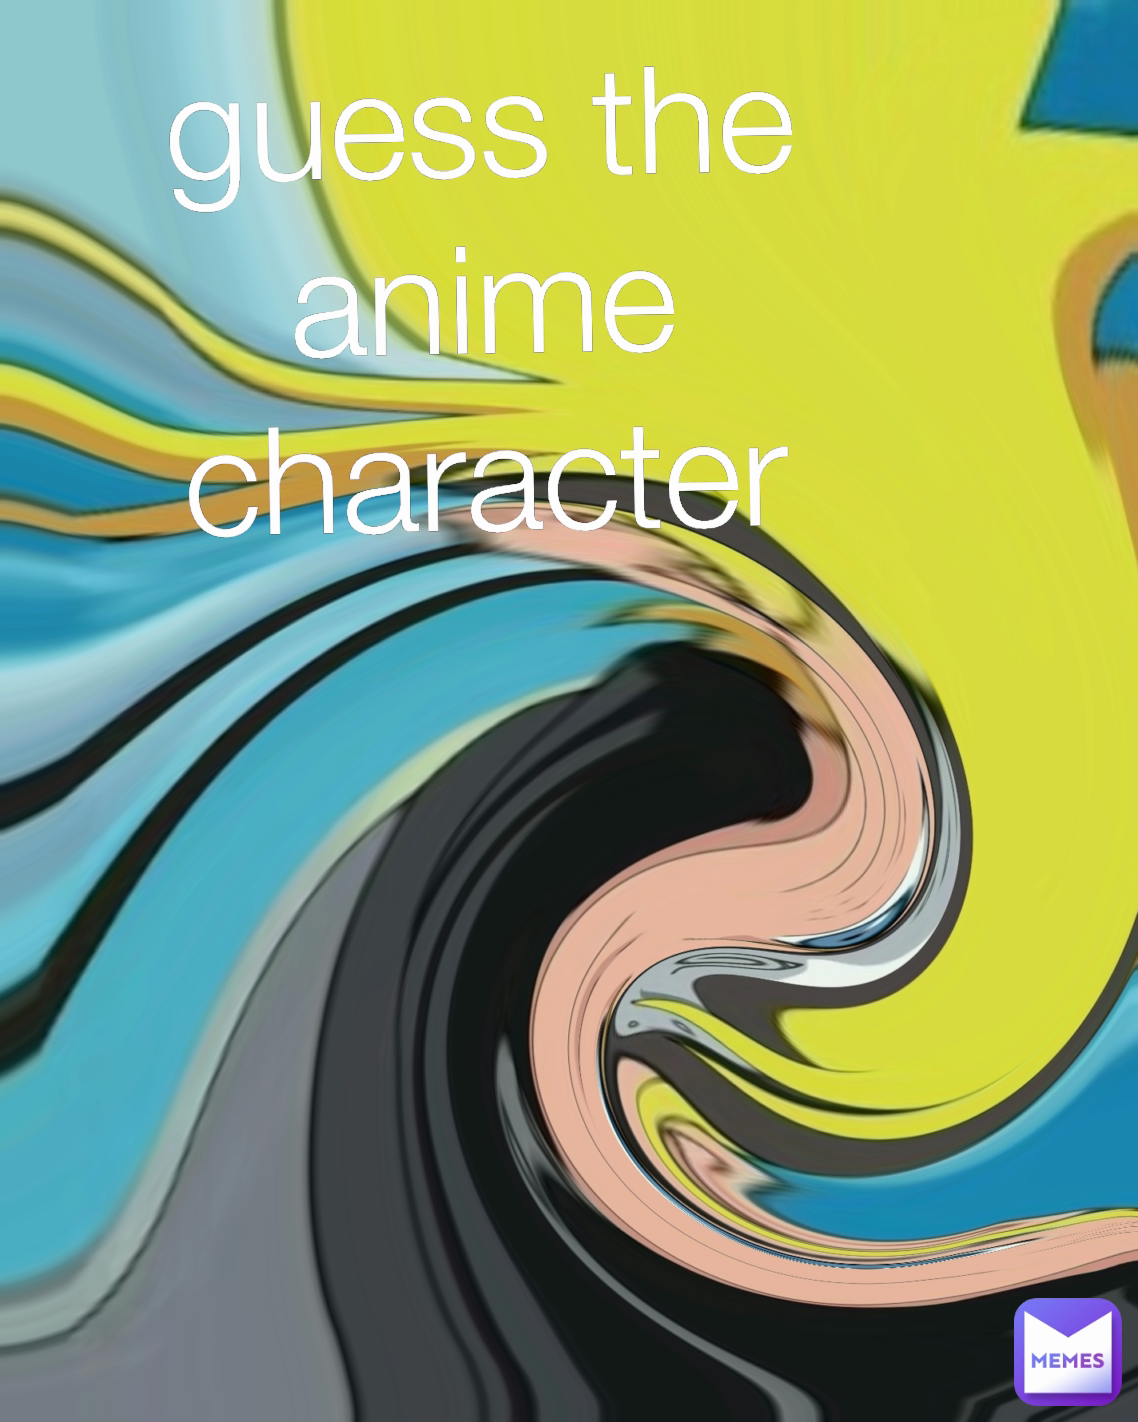 App Insights: Guess the Anime character | Apptopia